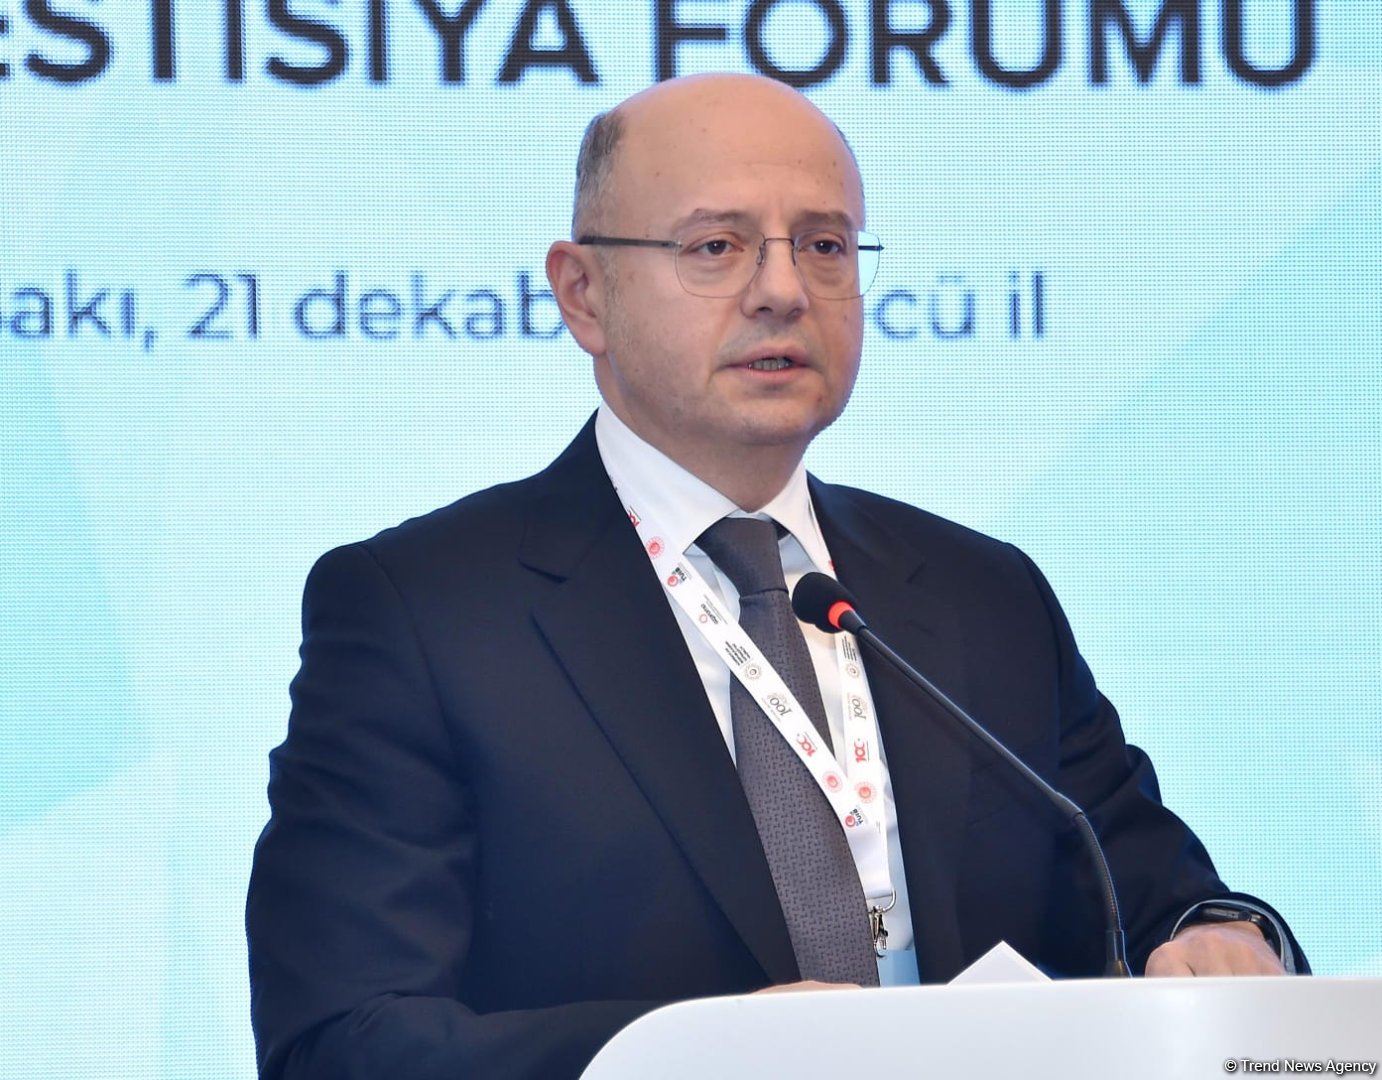 Azerbaijan to launch construction of two solar plants by year-end - minister